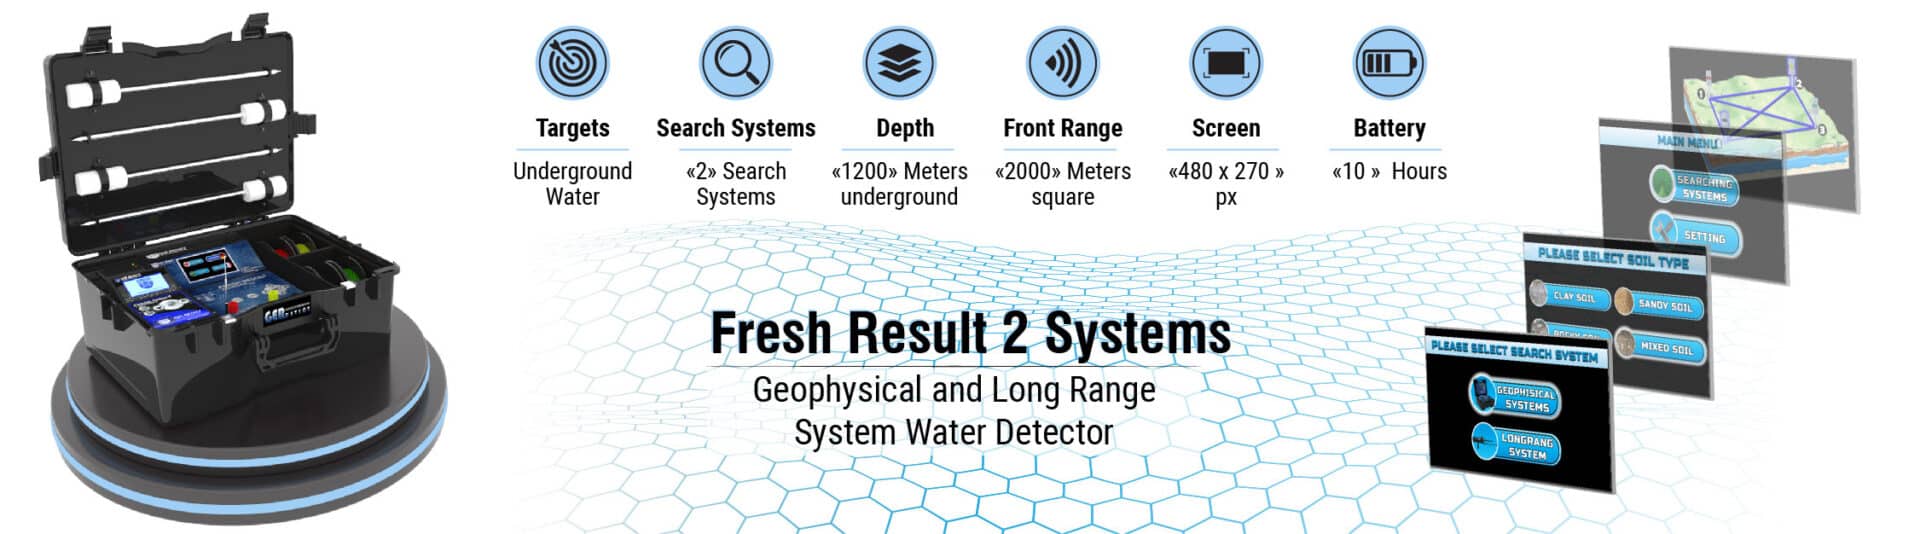 FRESH RESULT 2 SYSTEMS DETECTOR